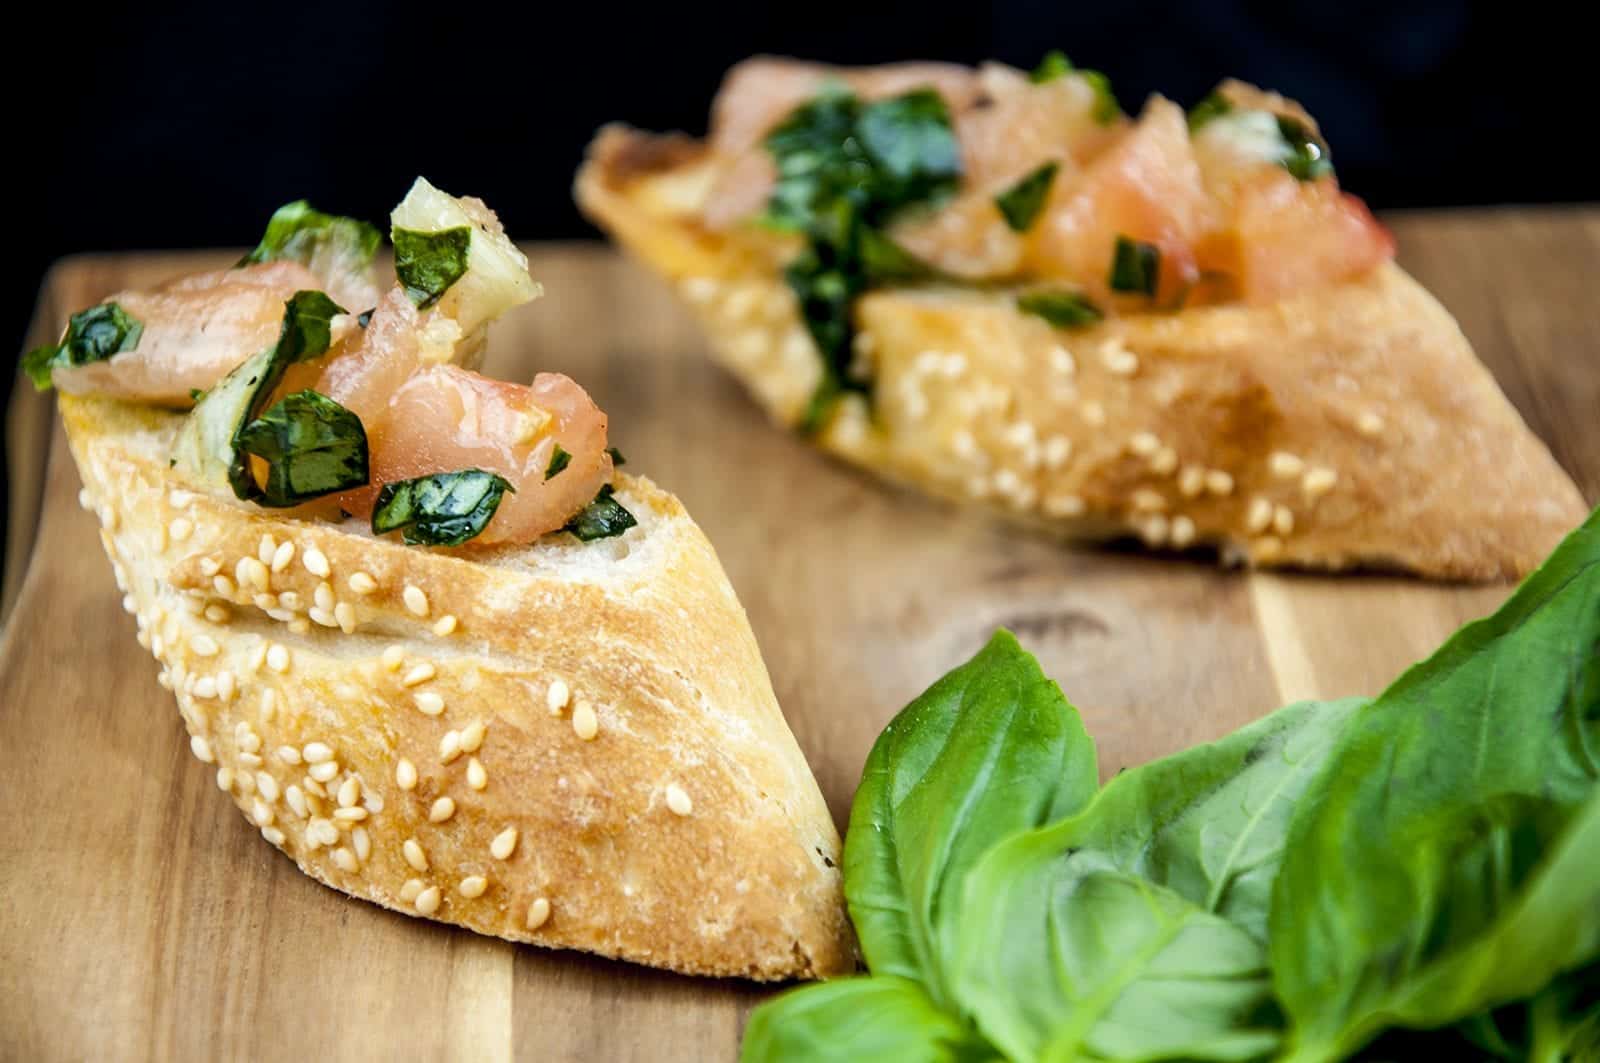 Enjoy the taste of Italy in this homemade bruschetta. Wonderful garlic, tomato concasse, basil, and extra virgin olive oil. Make the bread too if you like! | theyumyumclub.com